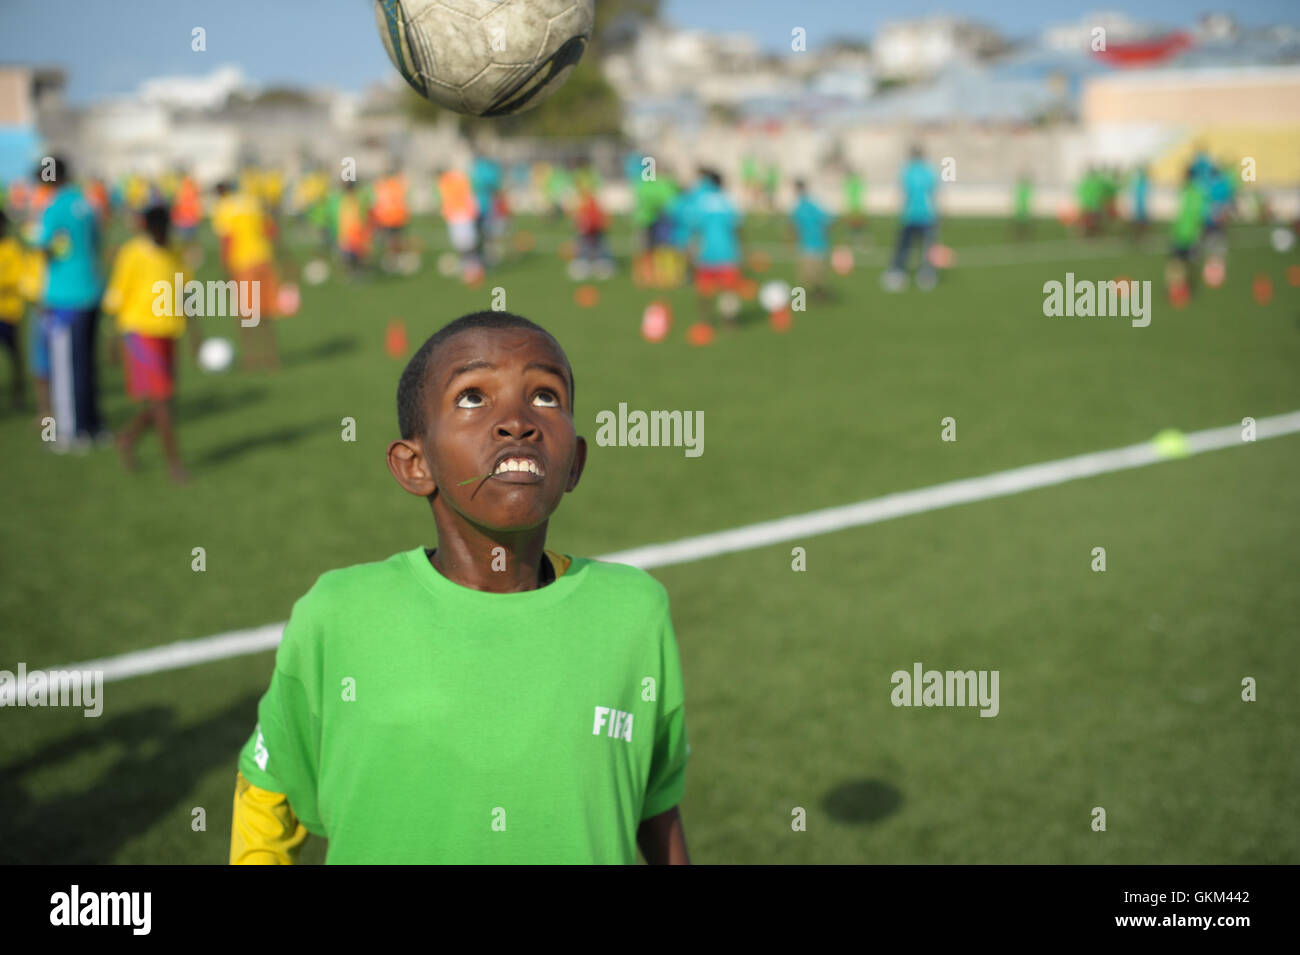 A child headers a ball during practice at the FIFA Football Festival in Mogadishu, Somalia, on August 19